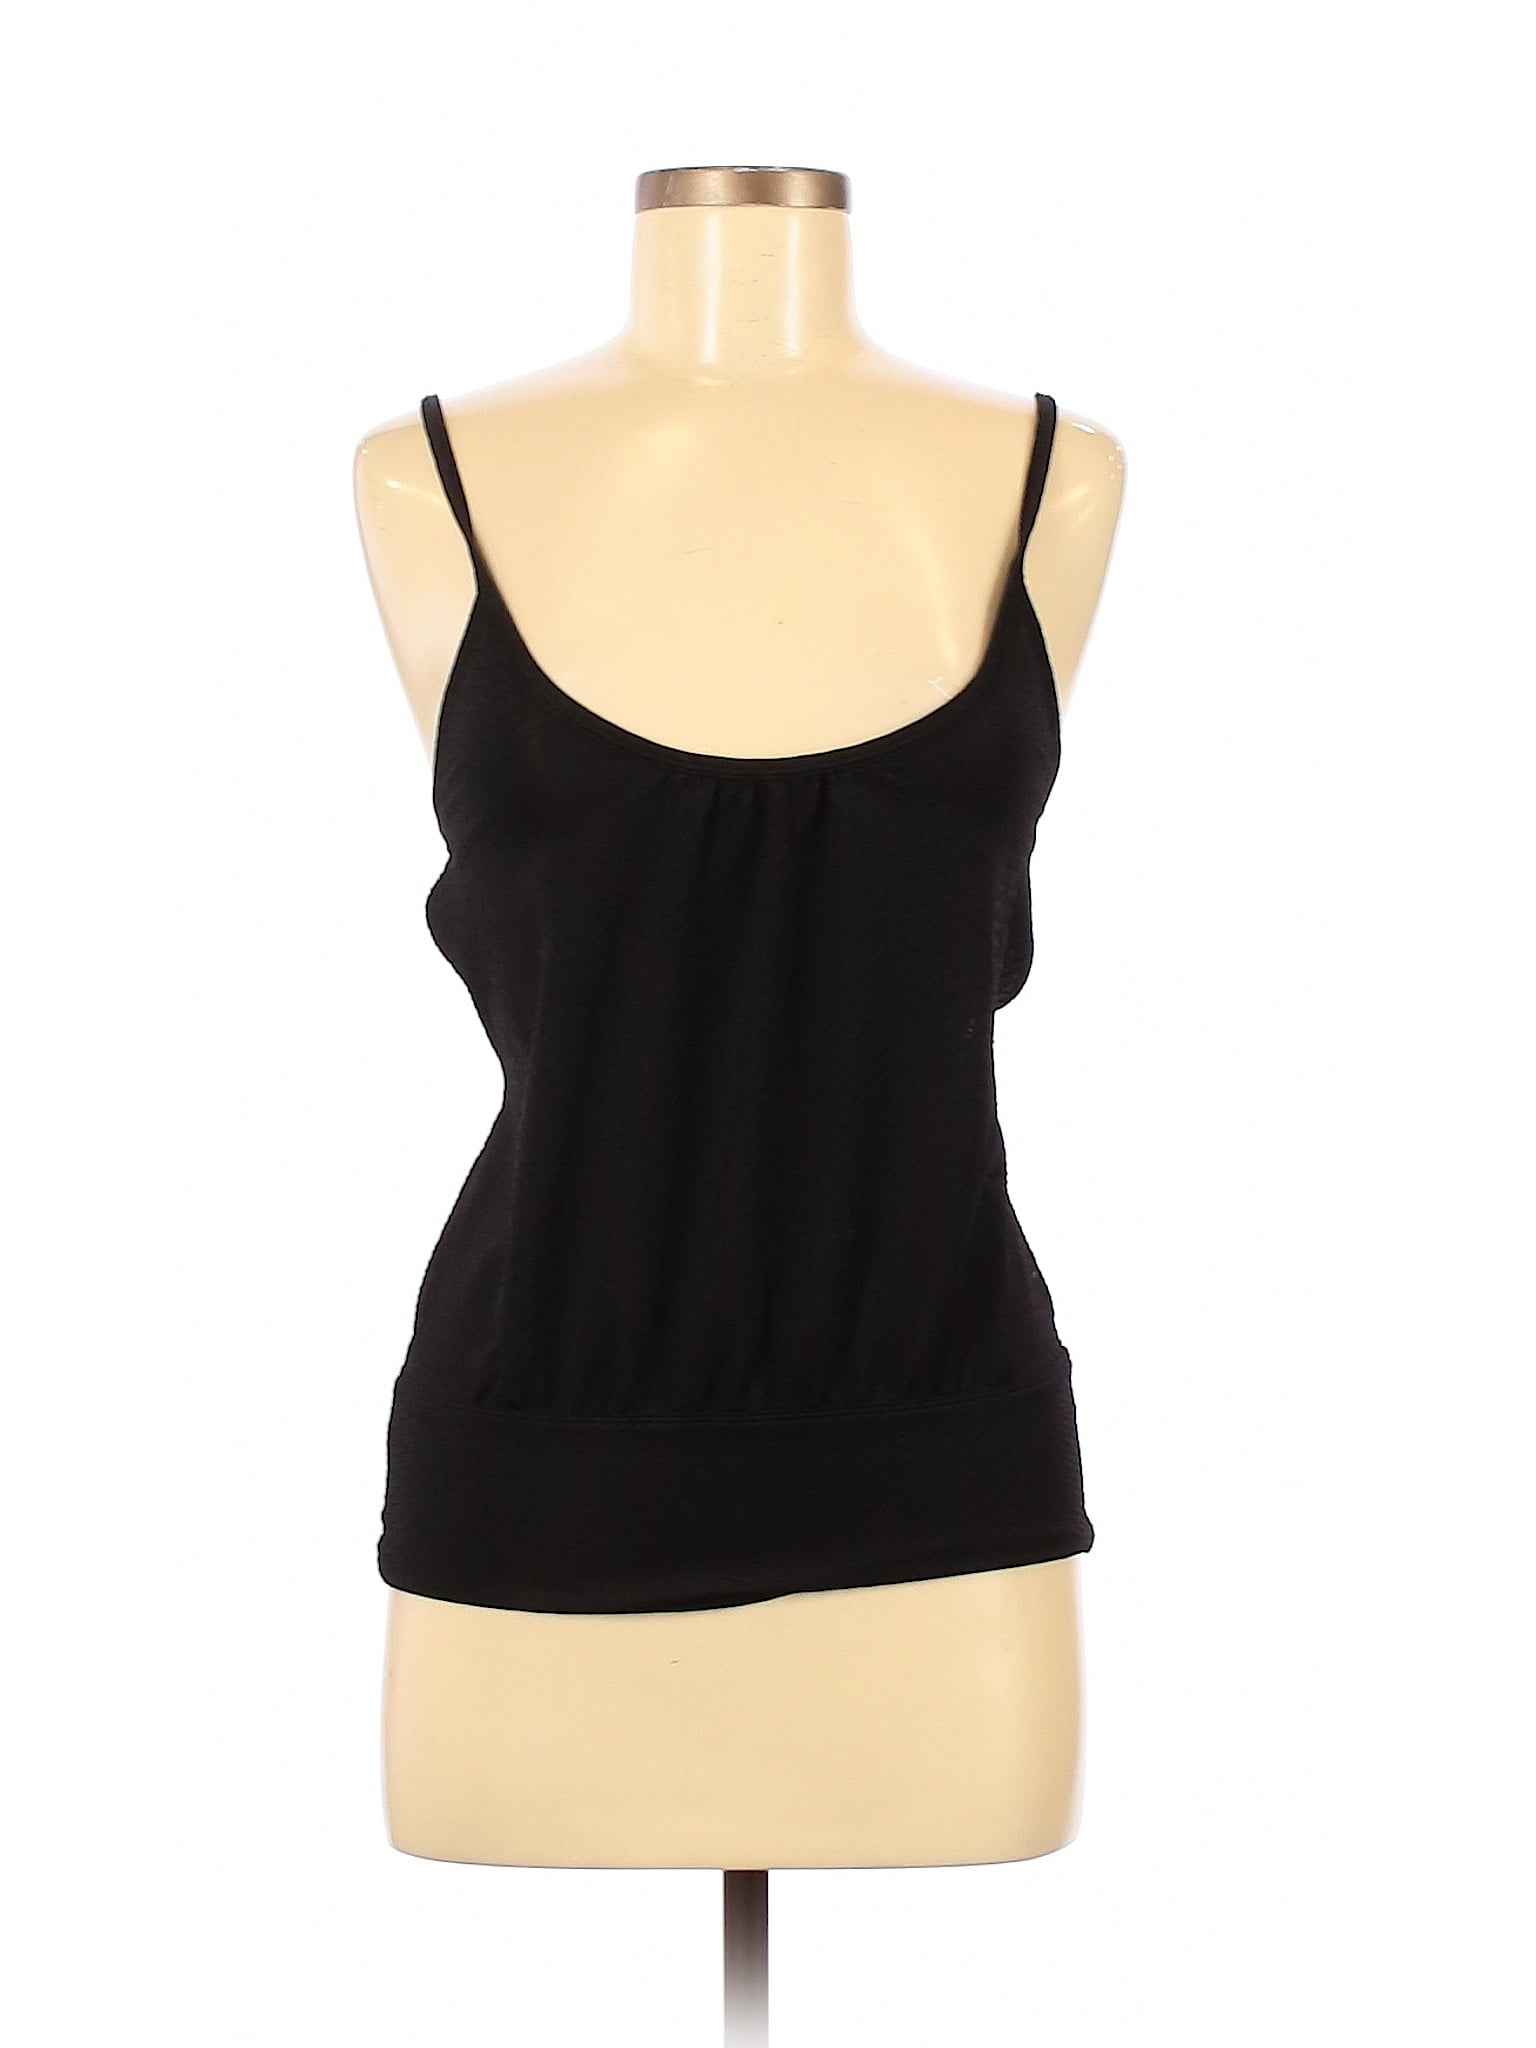 FP Movement - Pre-Owned FP Movement Women's Size XS Active Tank ...